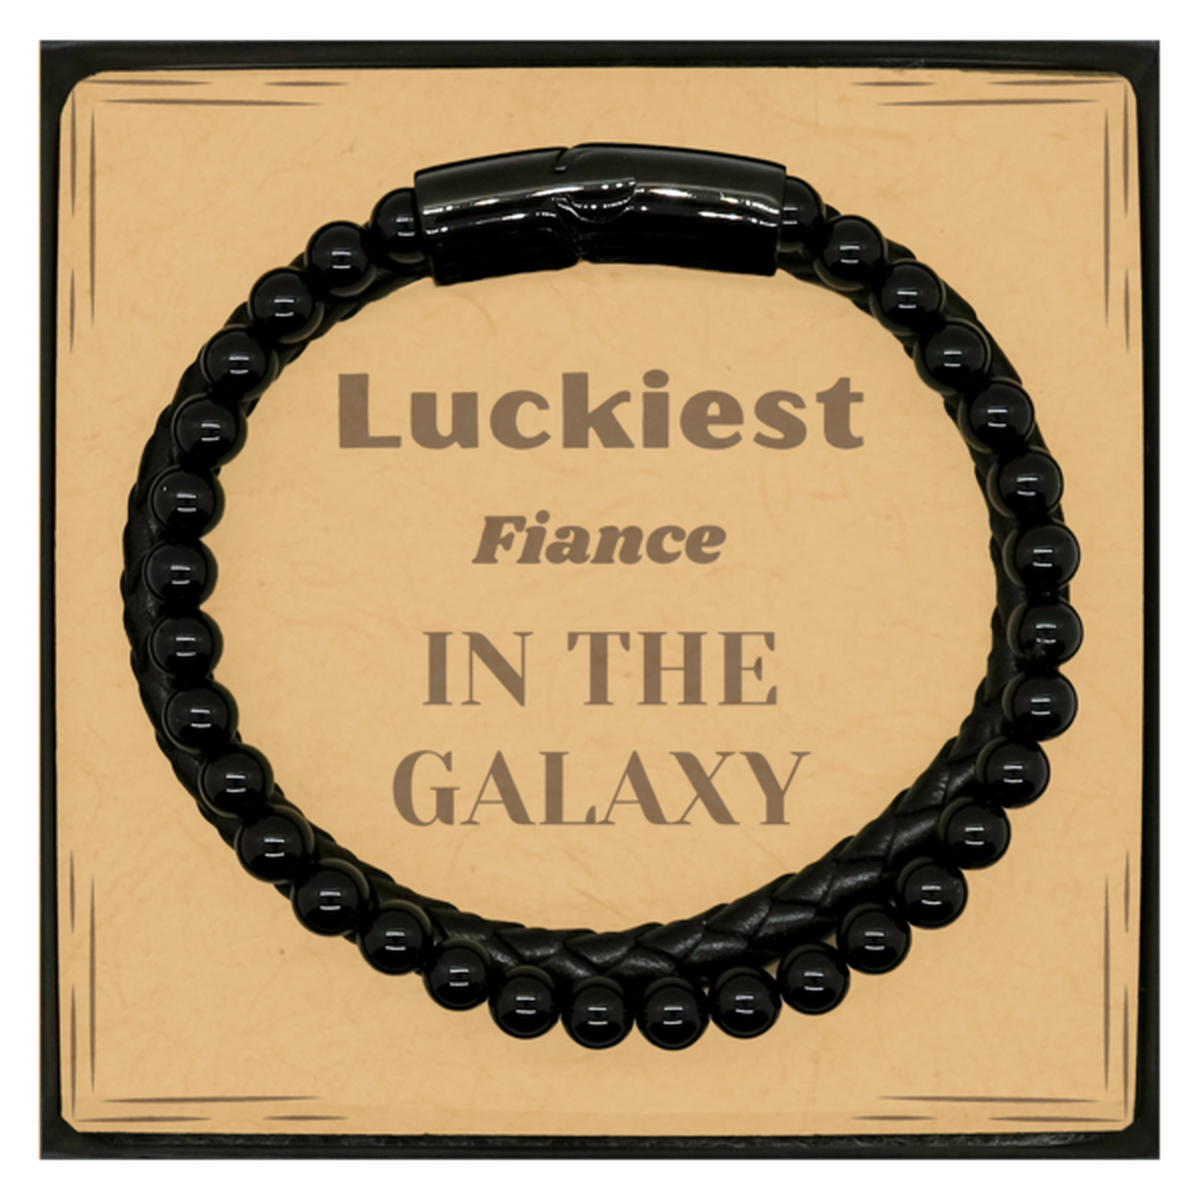 Luckiest Fiance in the Galaxy, To My Fiance Message Card Gifts, Christmas Fiance Stone Leather Bracelets Gifts, X-mas Birthday Unique Gifts For Fiance Men Women